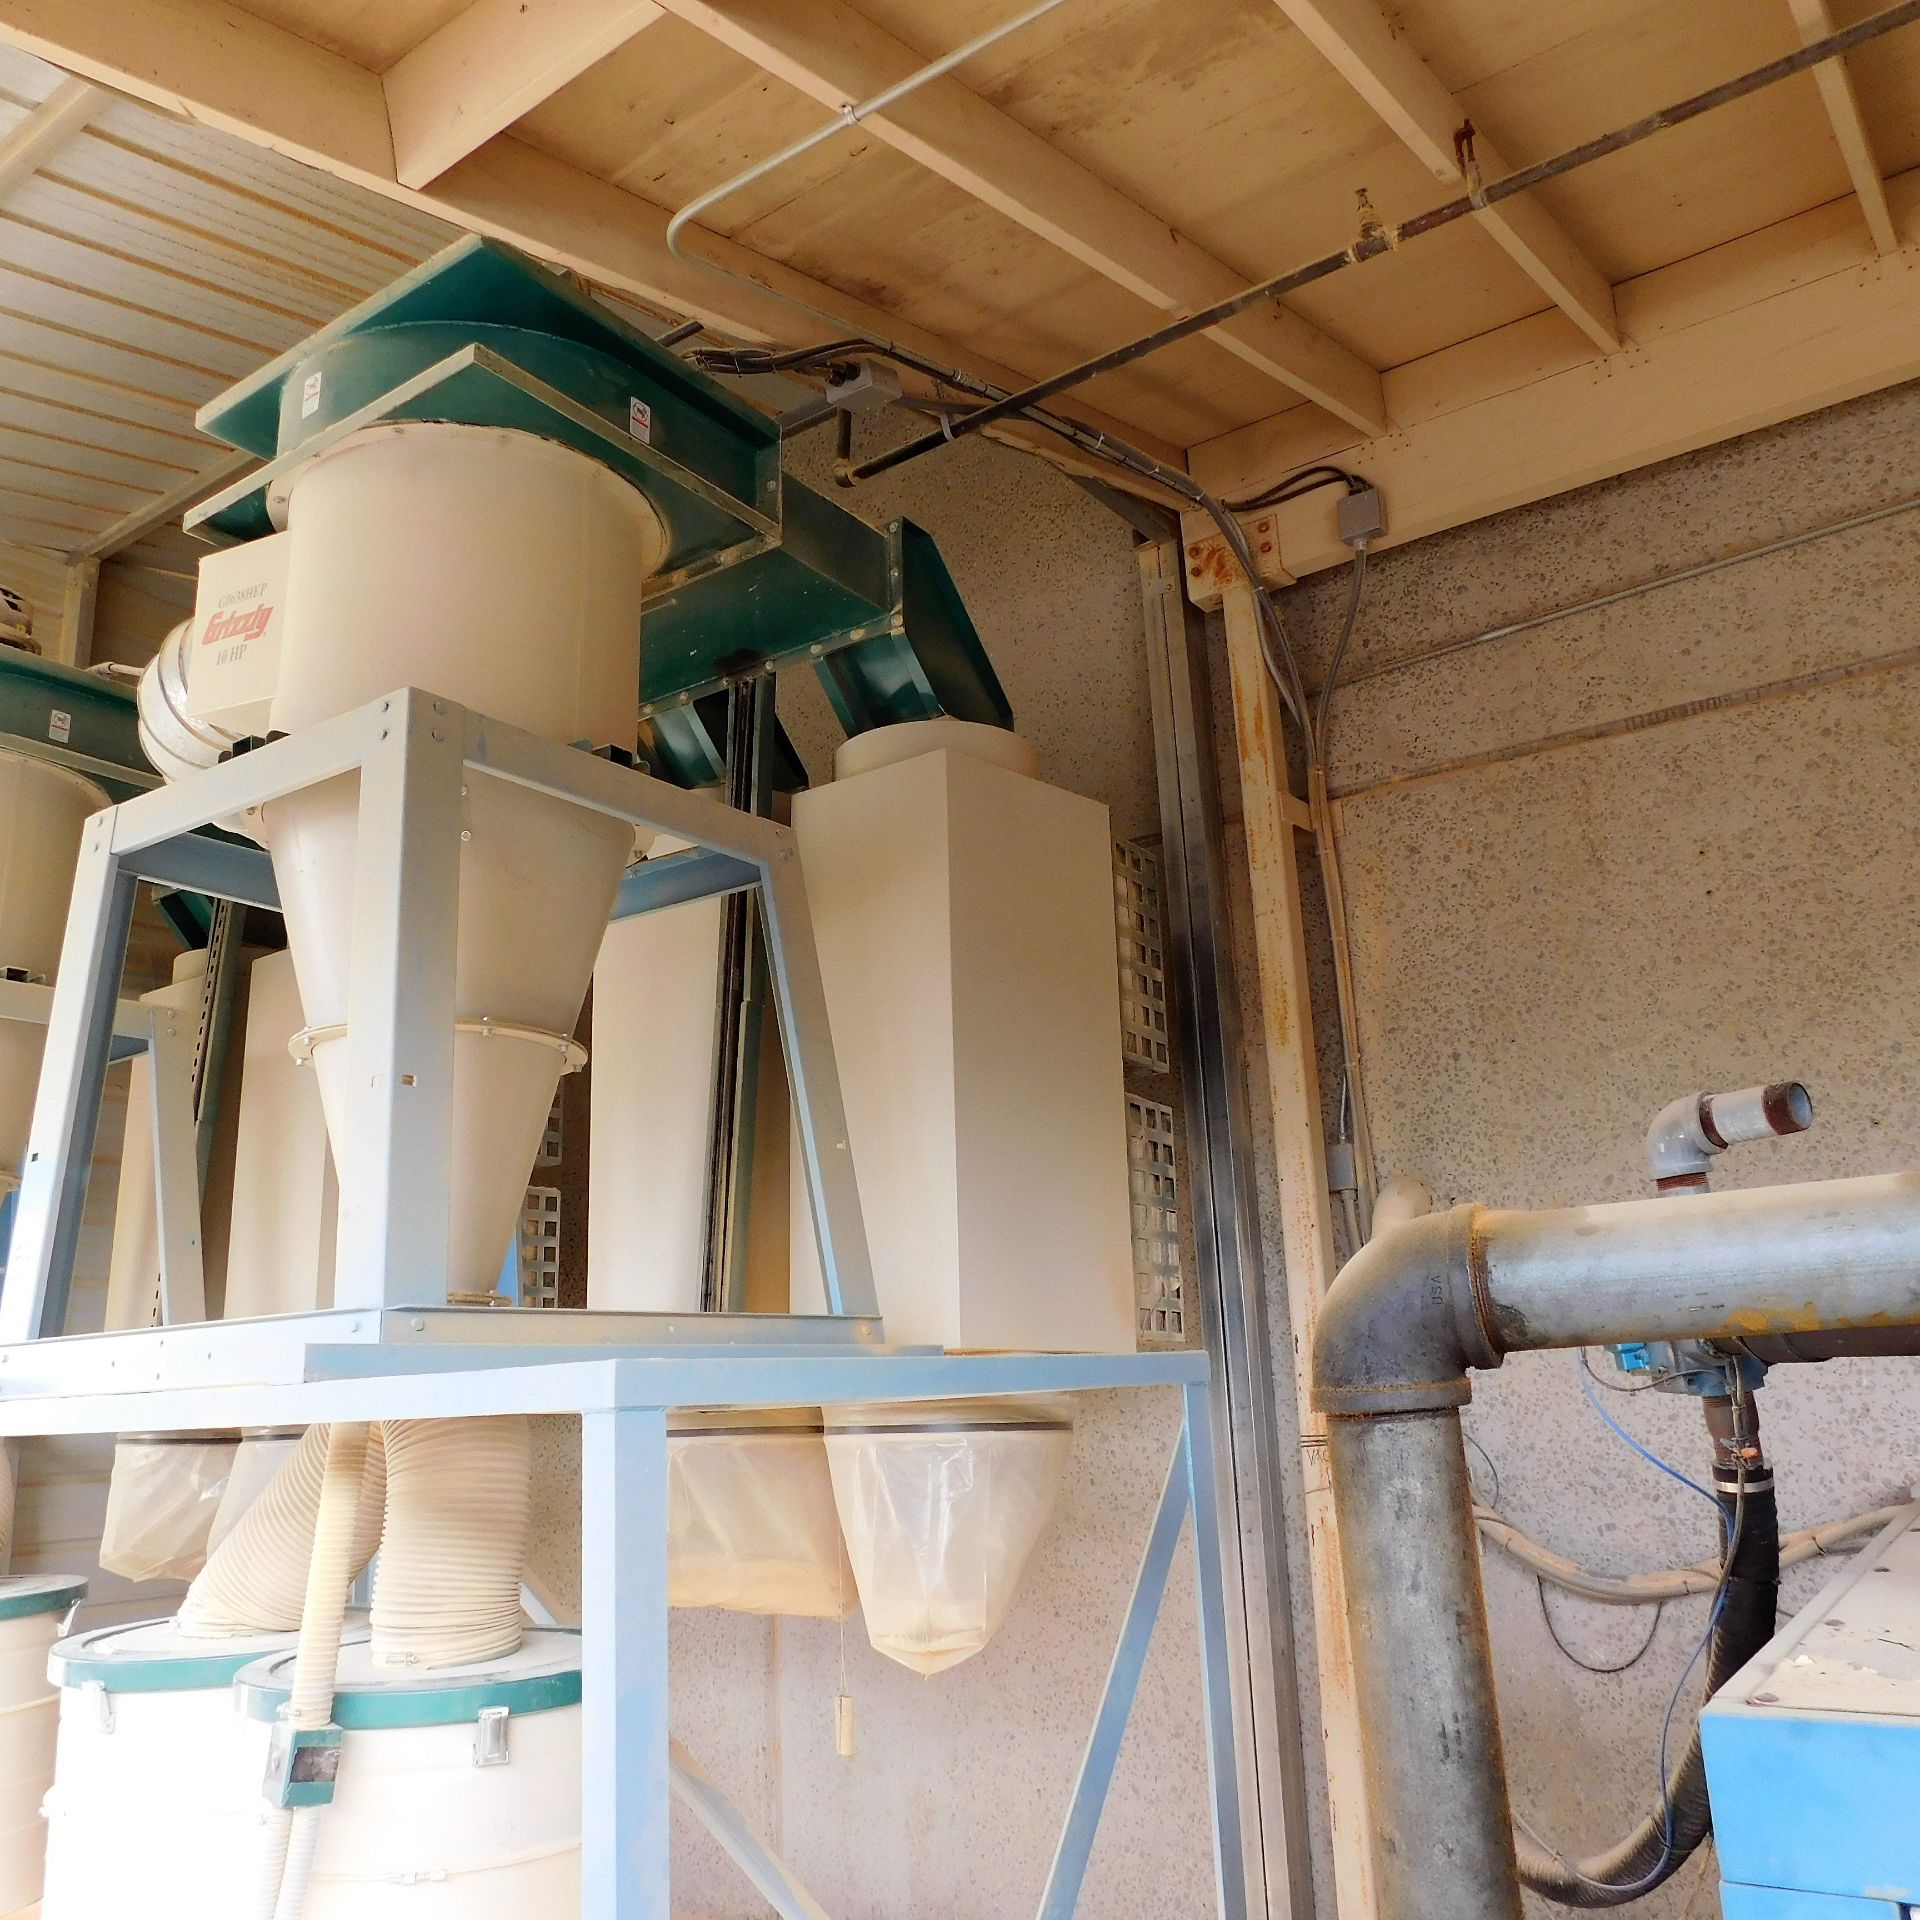 GRIZZLY 10HP 3-PHASE DUAL FILTRATION HEPA CYCLONE DUST COLLECTOR, MODEL G0638HEP (DELAYED PICKUP; - Image 2 of 2